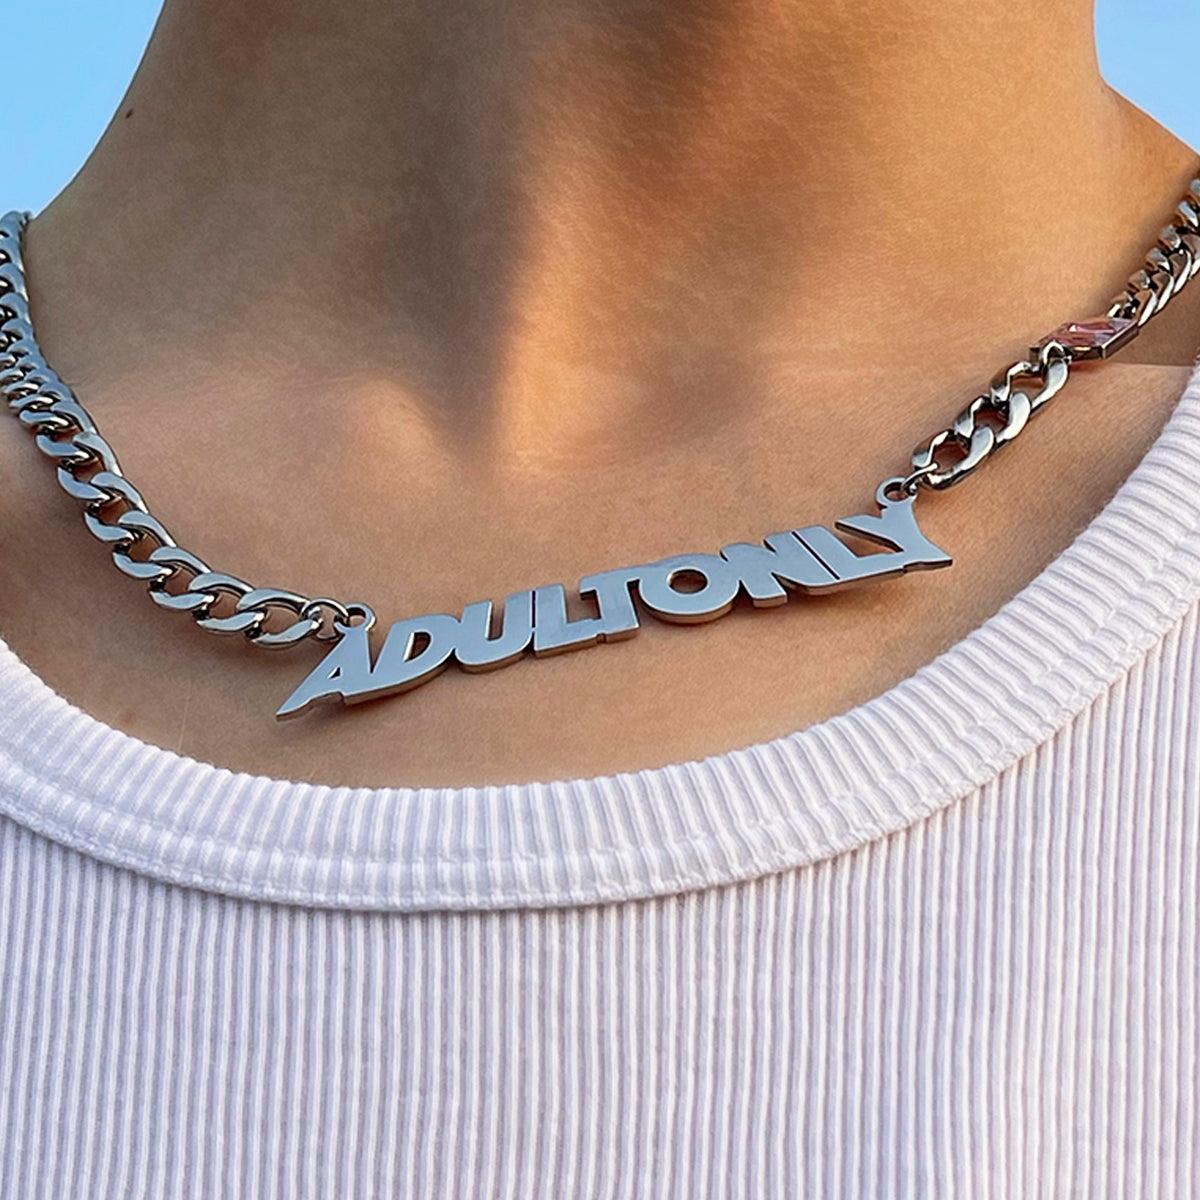 Adultonly Aesthetic Necklace - Aesthetic Clothes Shop